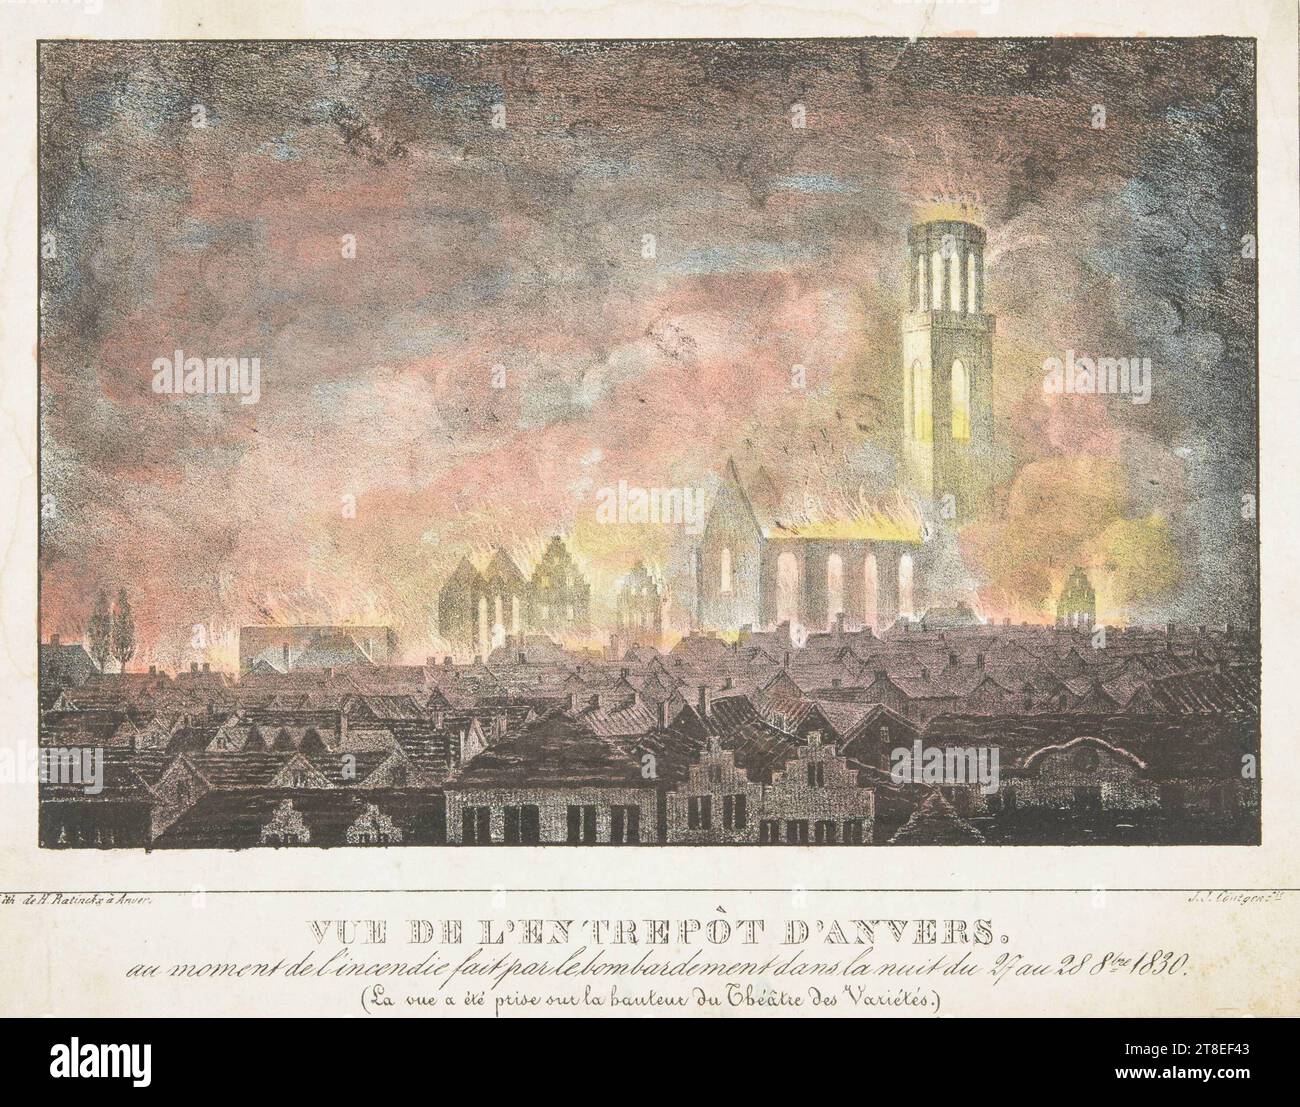 Fire of St. Michael's Church in Antwerp during bombardment 1830. Antwerp. Belgian independence. Lith. by H. Ratinckx in Antwerp. View of the Antwerp warehouse, at the time of the fire made by the bombardment in the night of 27 to 28 October 1830 (the view was taken on the height of the Variety Theatre). J. J. Cöntgen fec Stock Photo